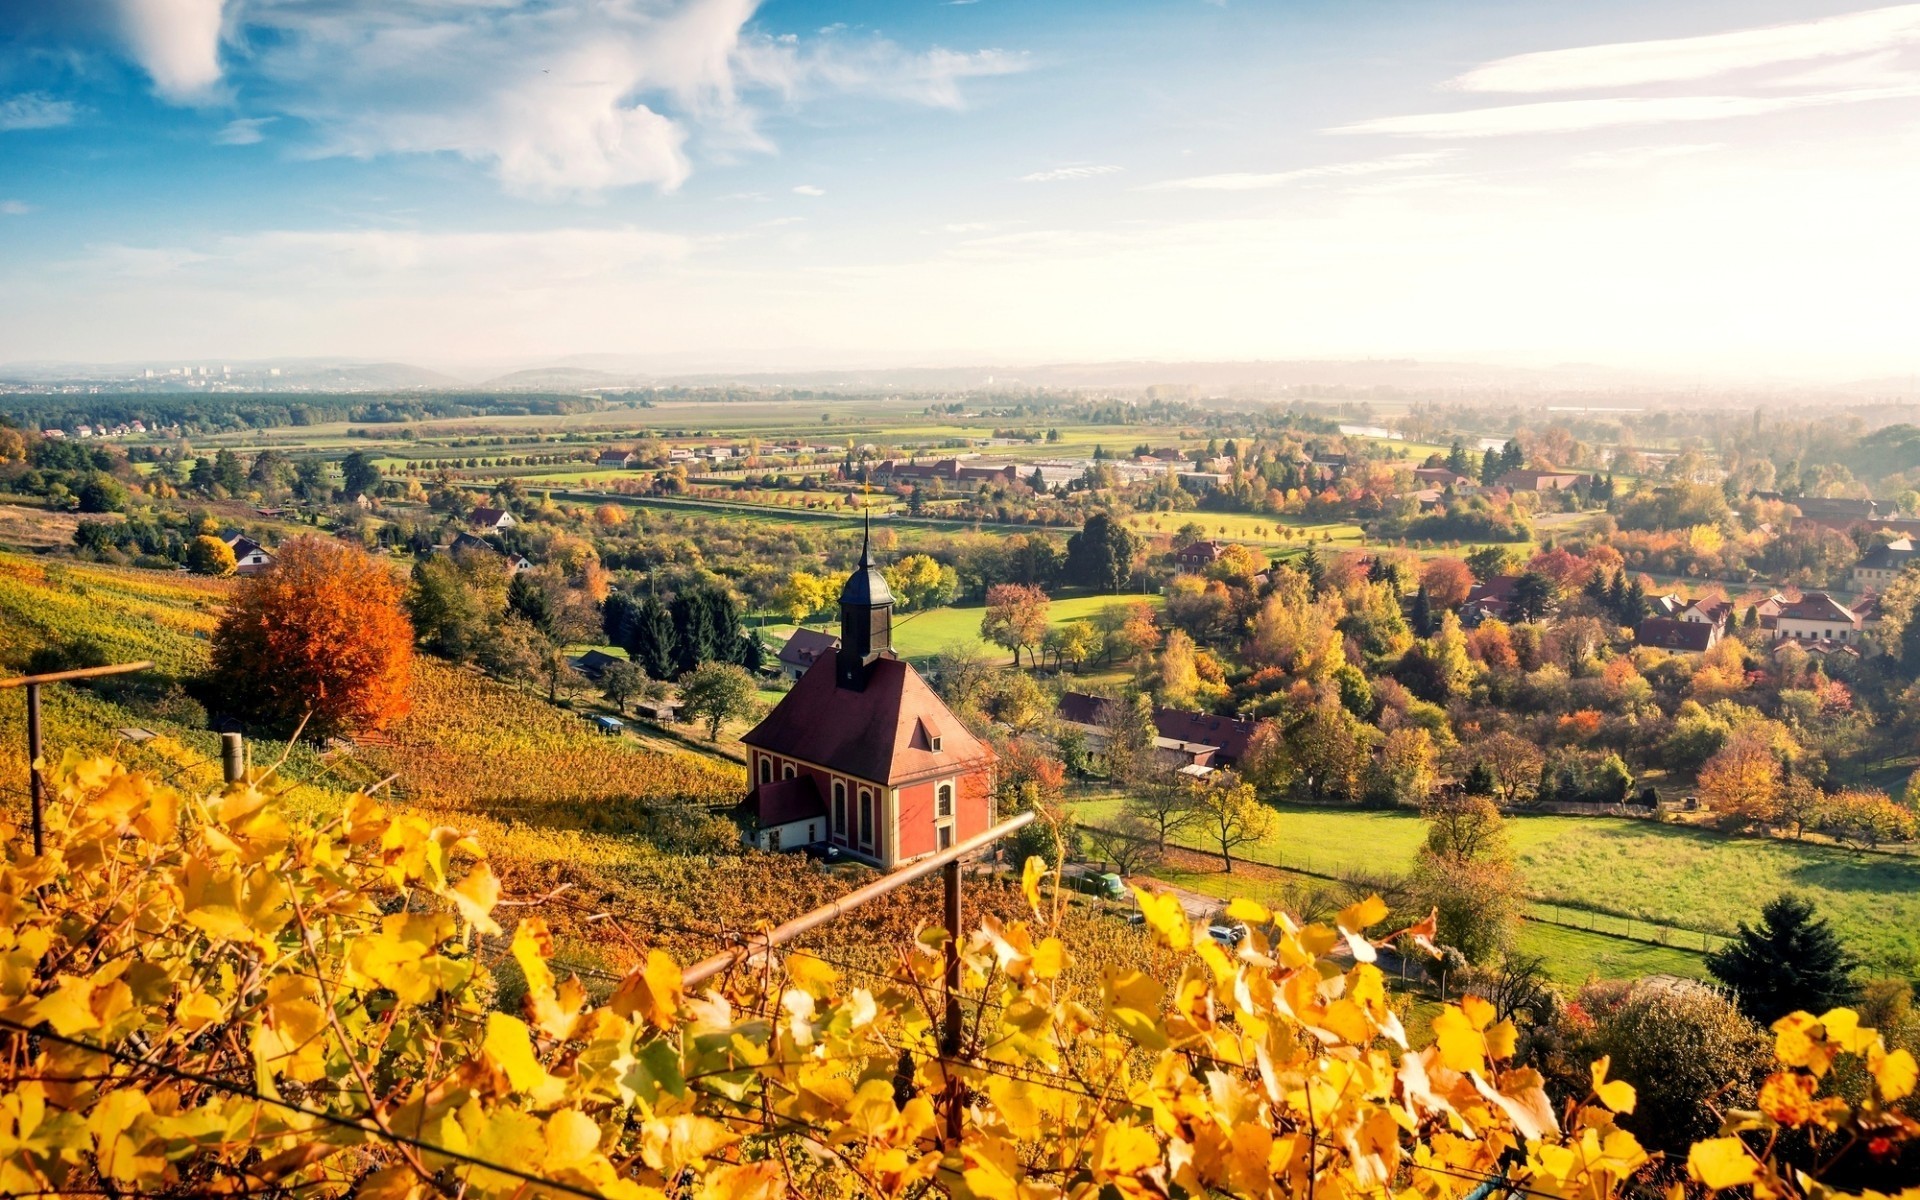 germany outdoors landscape travel fall house tree architecture vineyard scenic sky nature hill agriculture cropland daylight sight hills